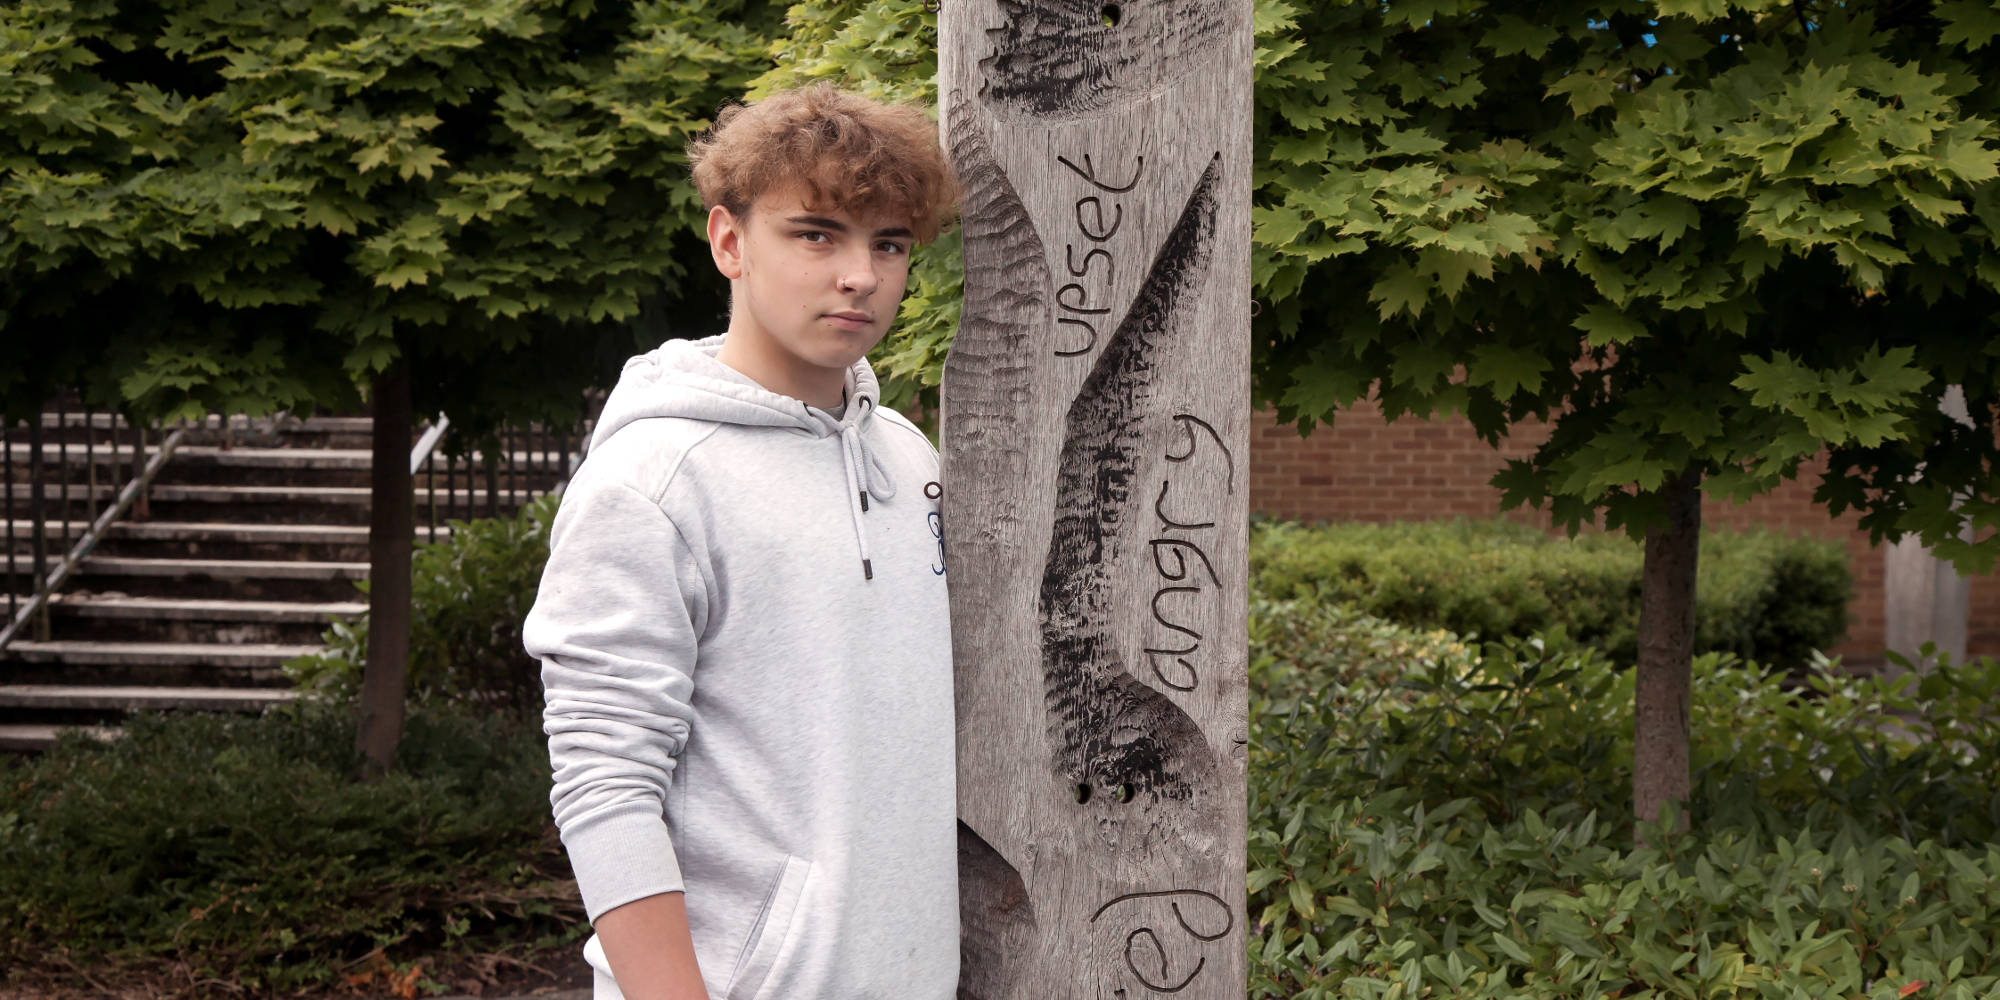 Boy next to tree with Angry written on it